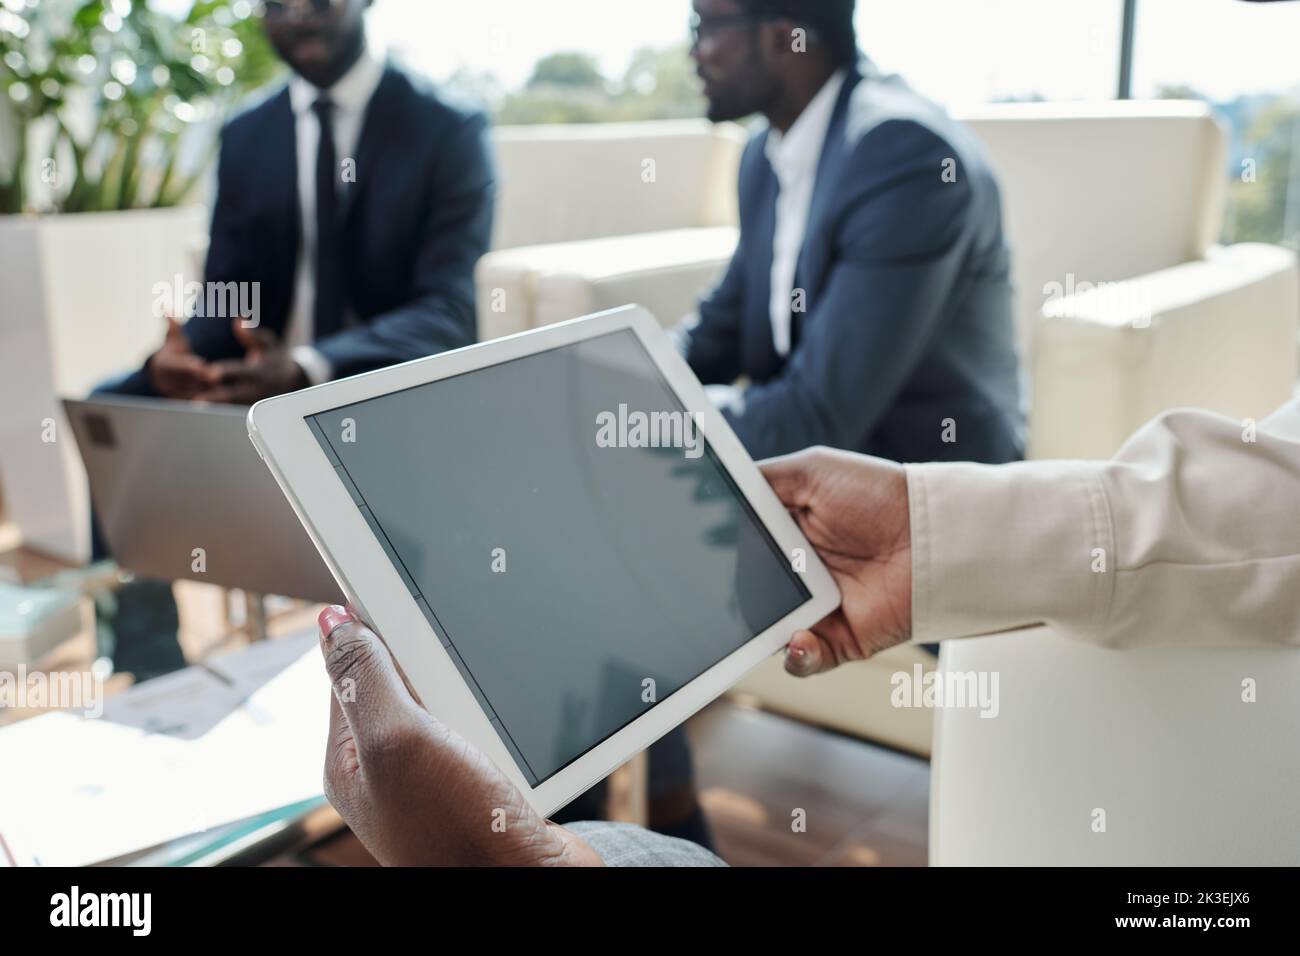 Tablet with black screen in hands of young African American businesswoman networking against two male coworkers Stock Photo